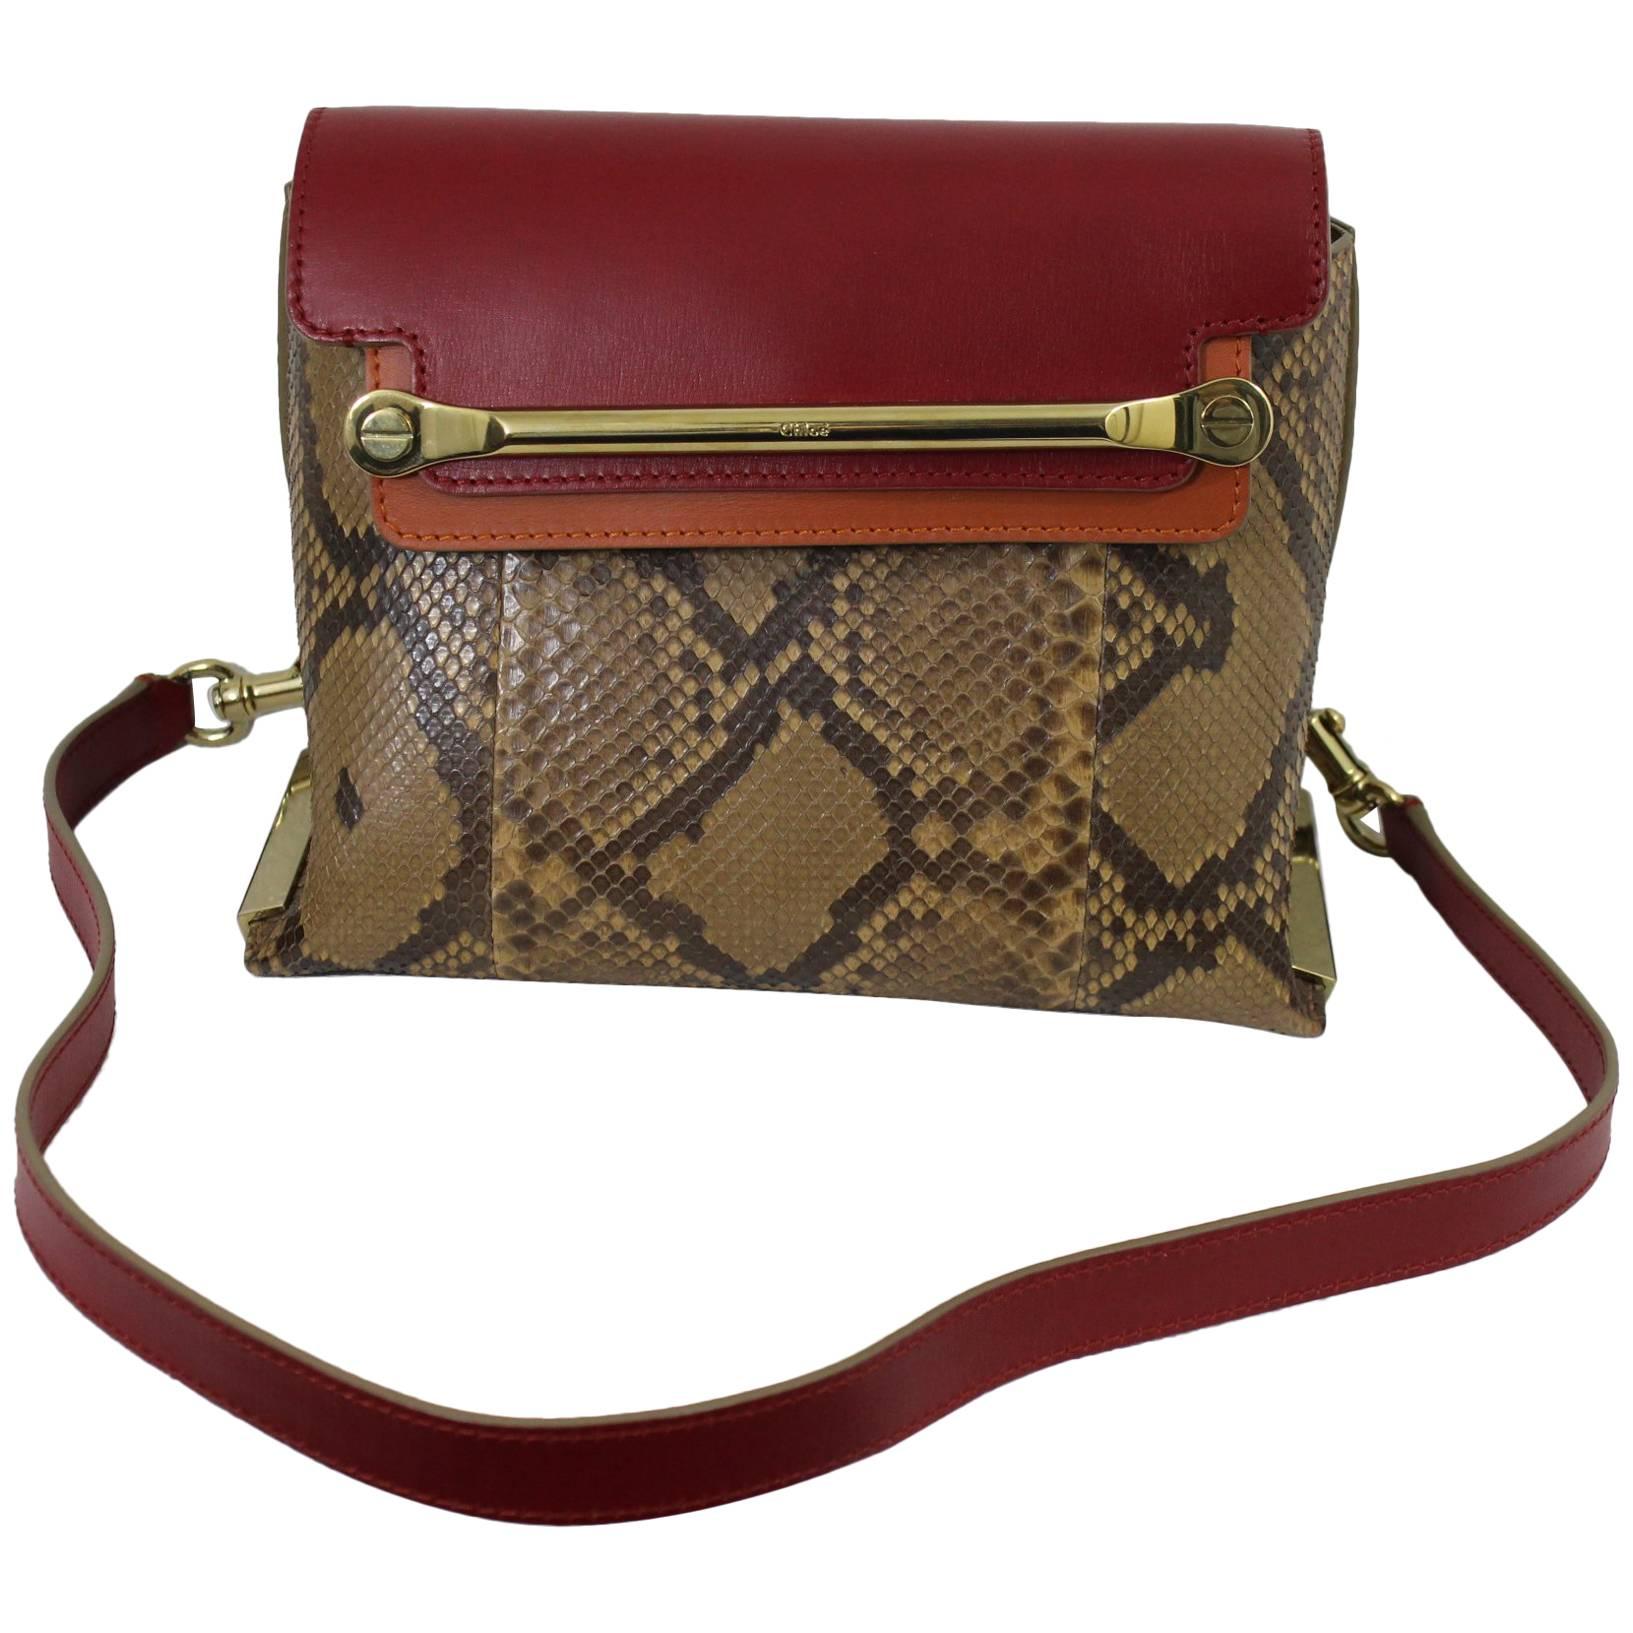 Chloe Clare Shoulder Bag in Leather and Snake For Sale